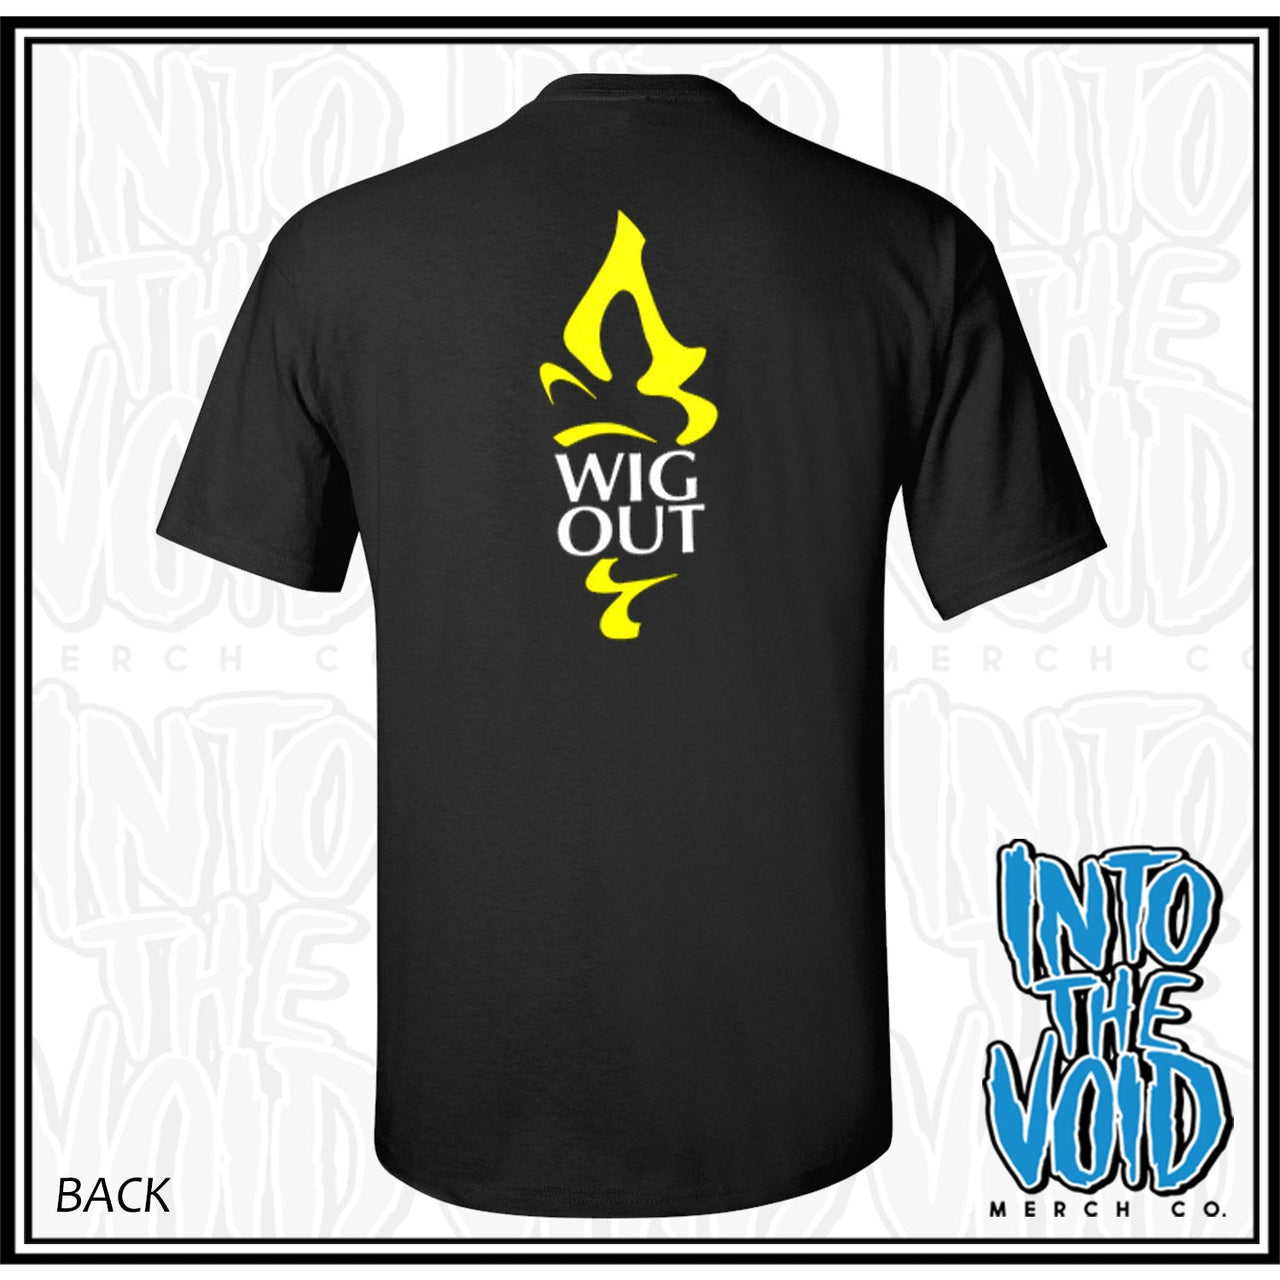 DAG NASTY - WIG OUT - Men's Short Sleeve T-Shirt - INTO THE VOID Merch Co.